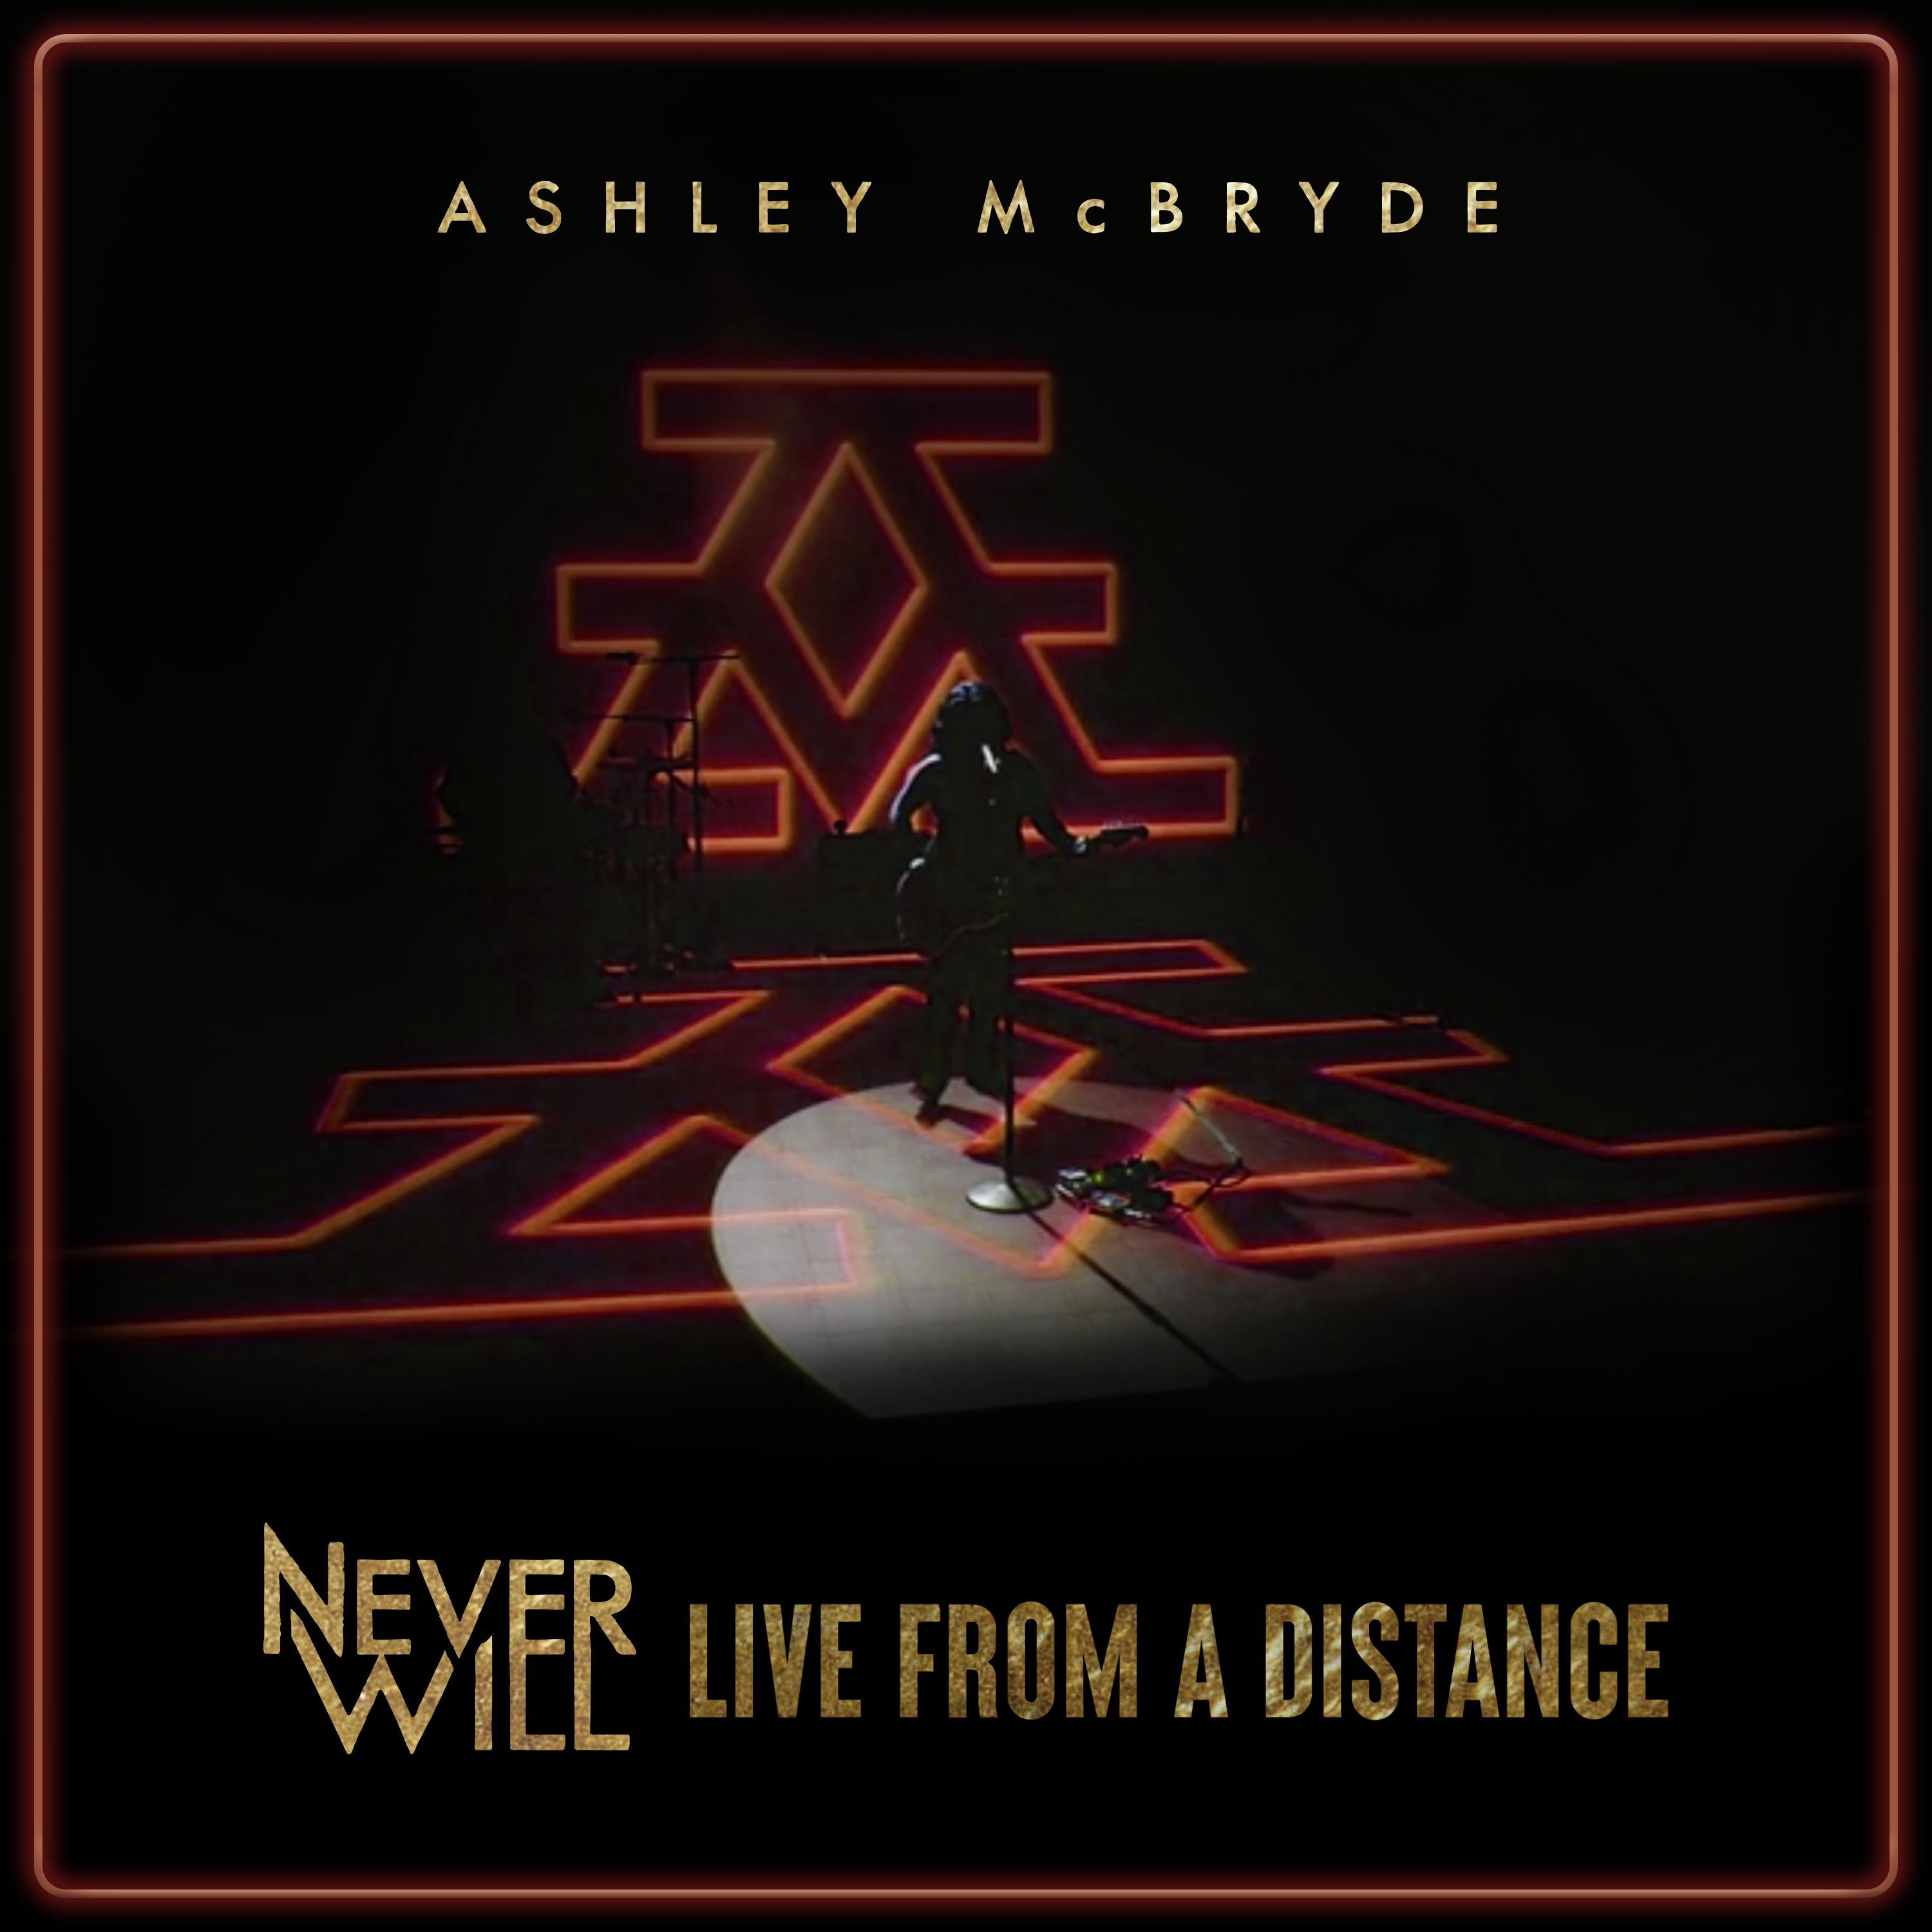 ASHLEY McBRYDE COMPLETES NEW LIVE EP NEVER WILL: LIVE FROM A DISTANCE